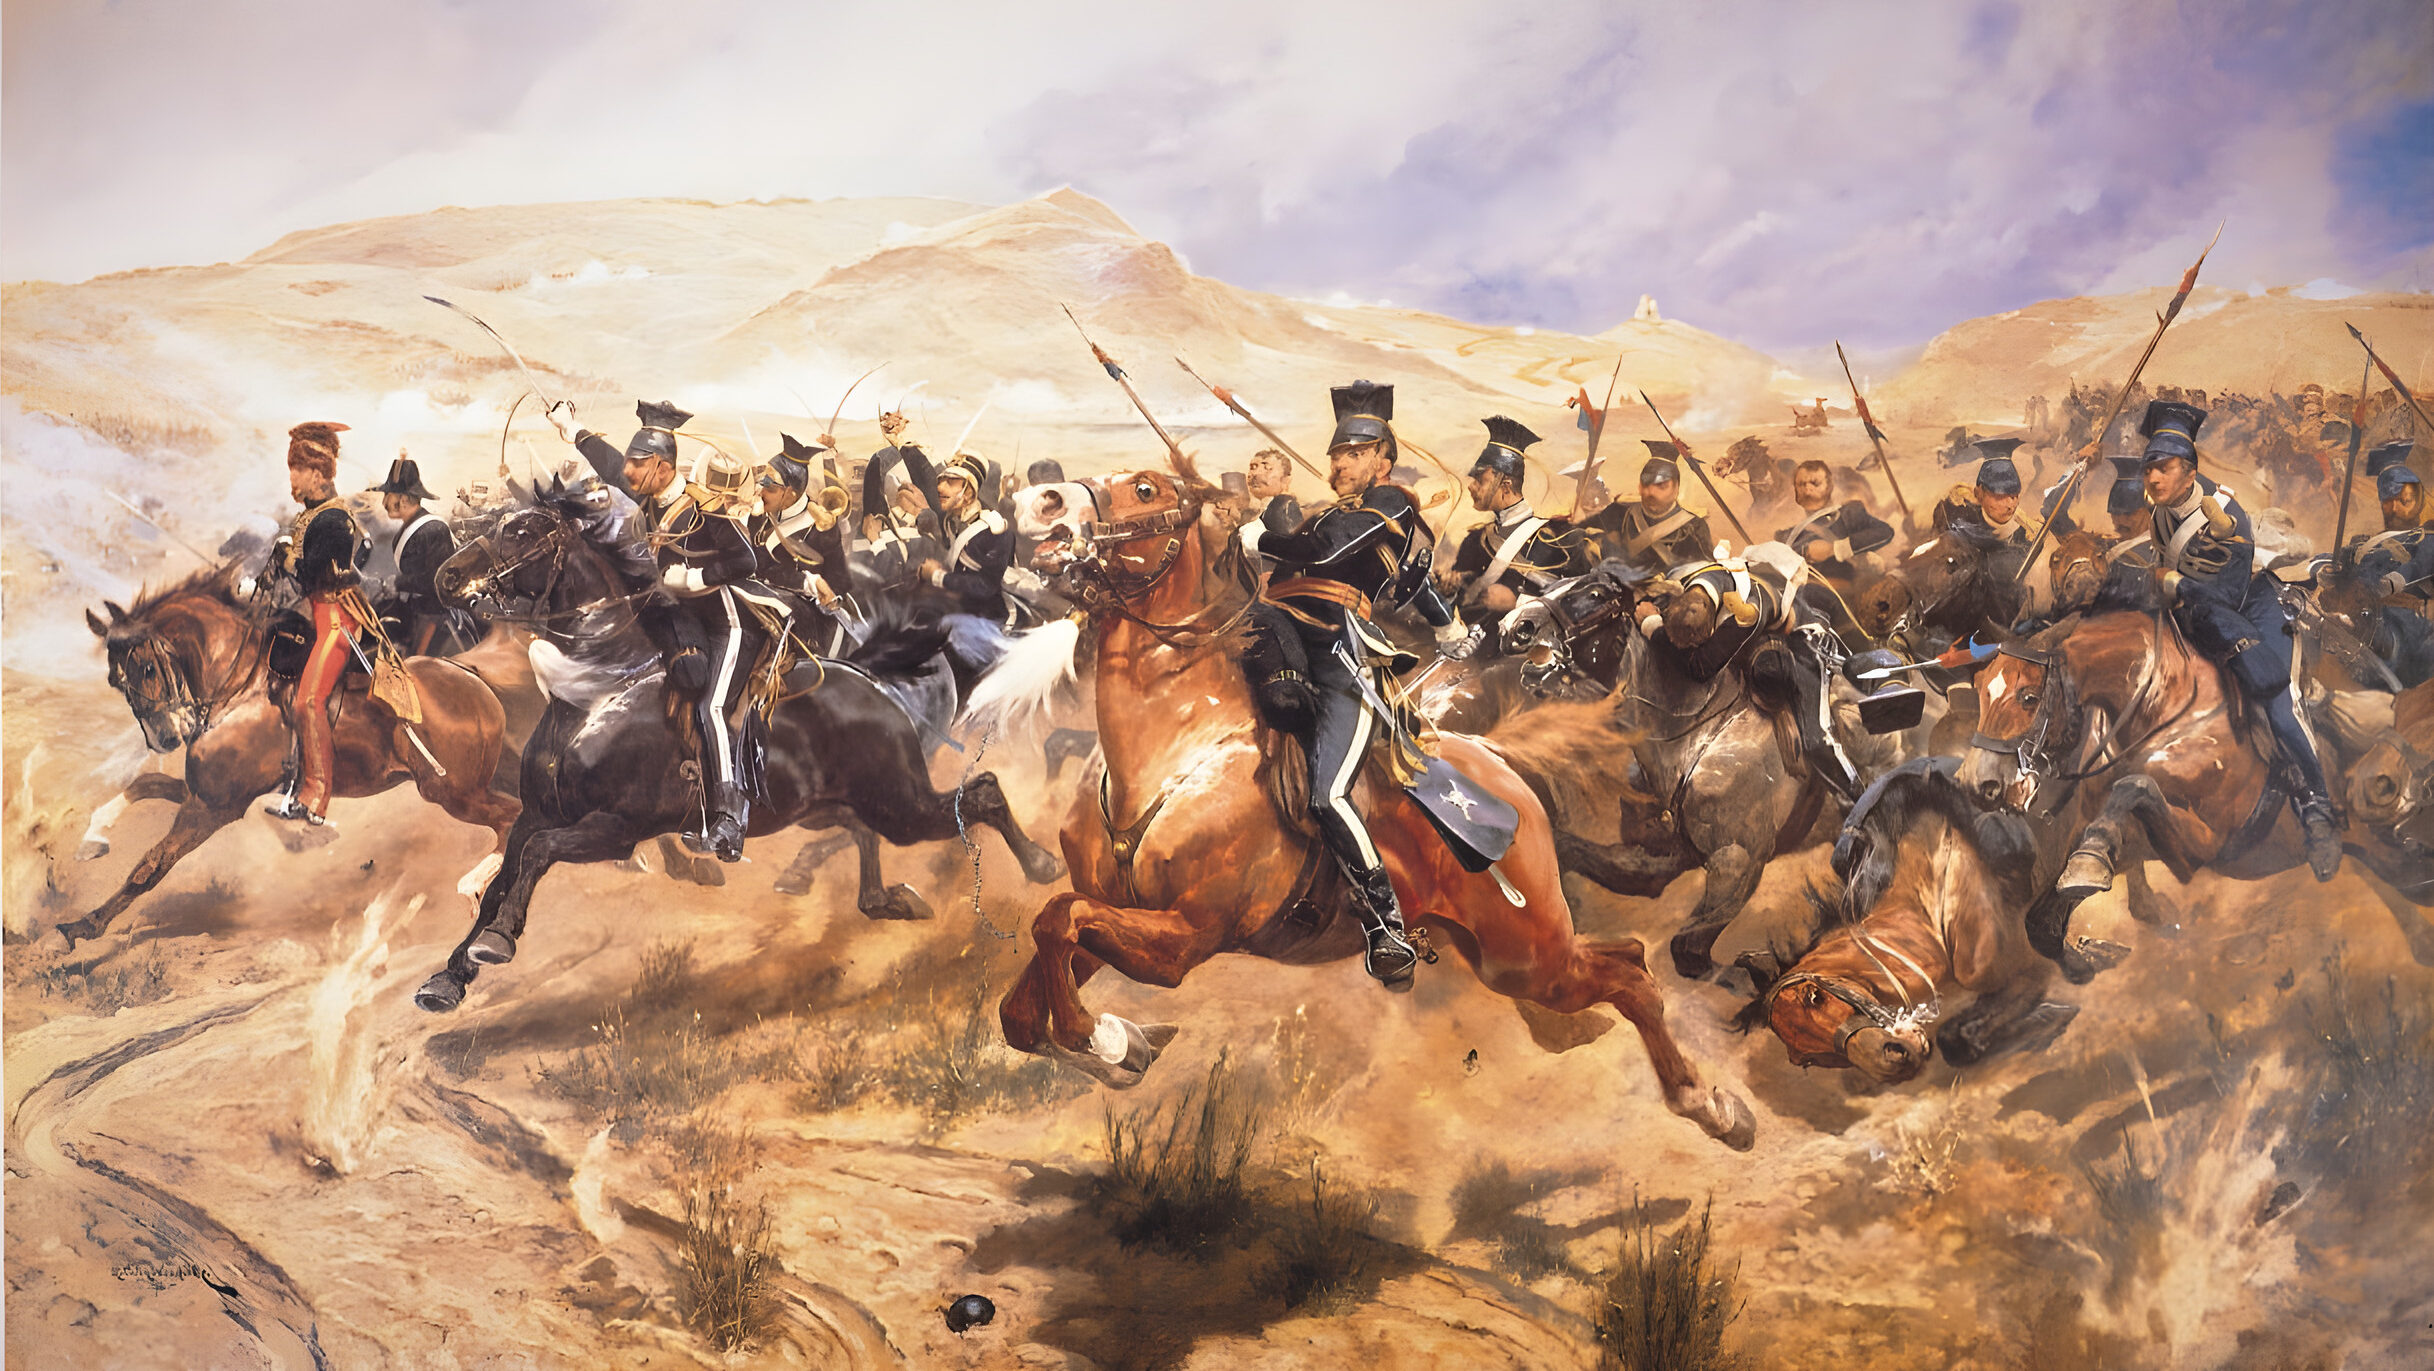 The Battle of Balaklava: Into the Valley of Death